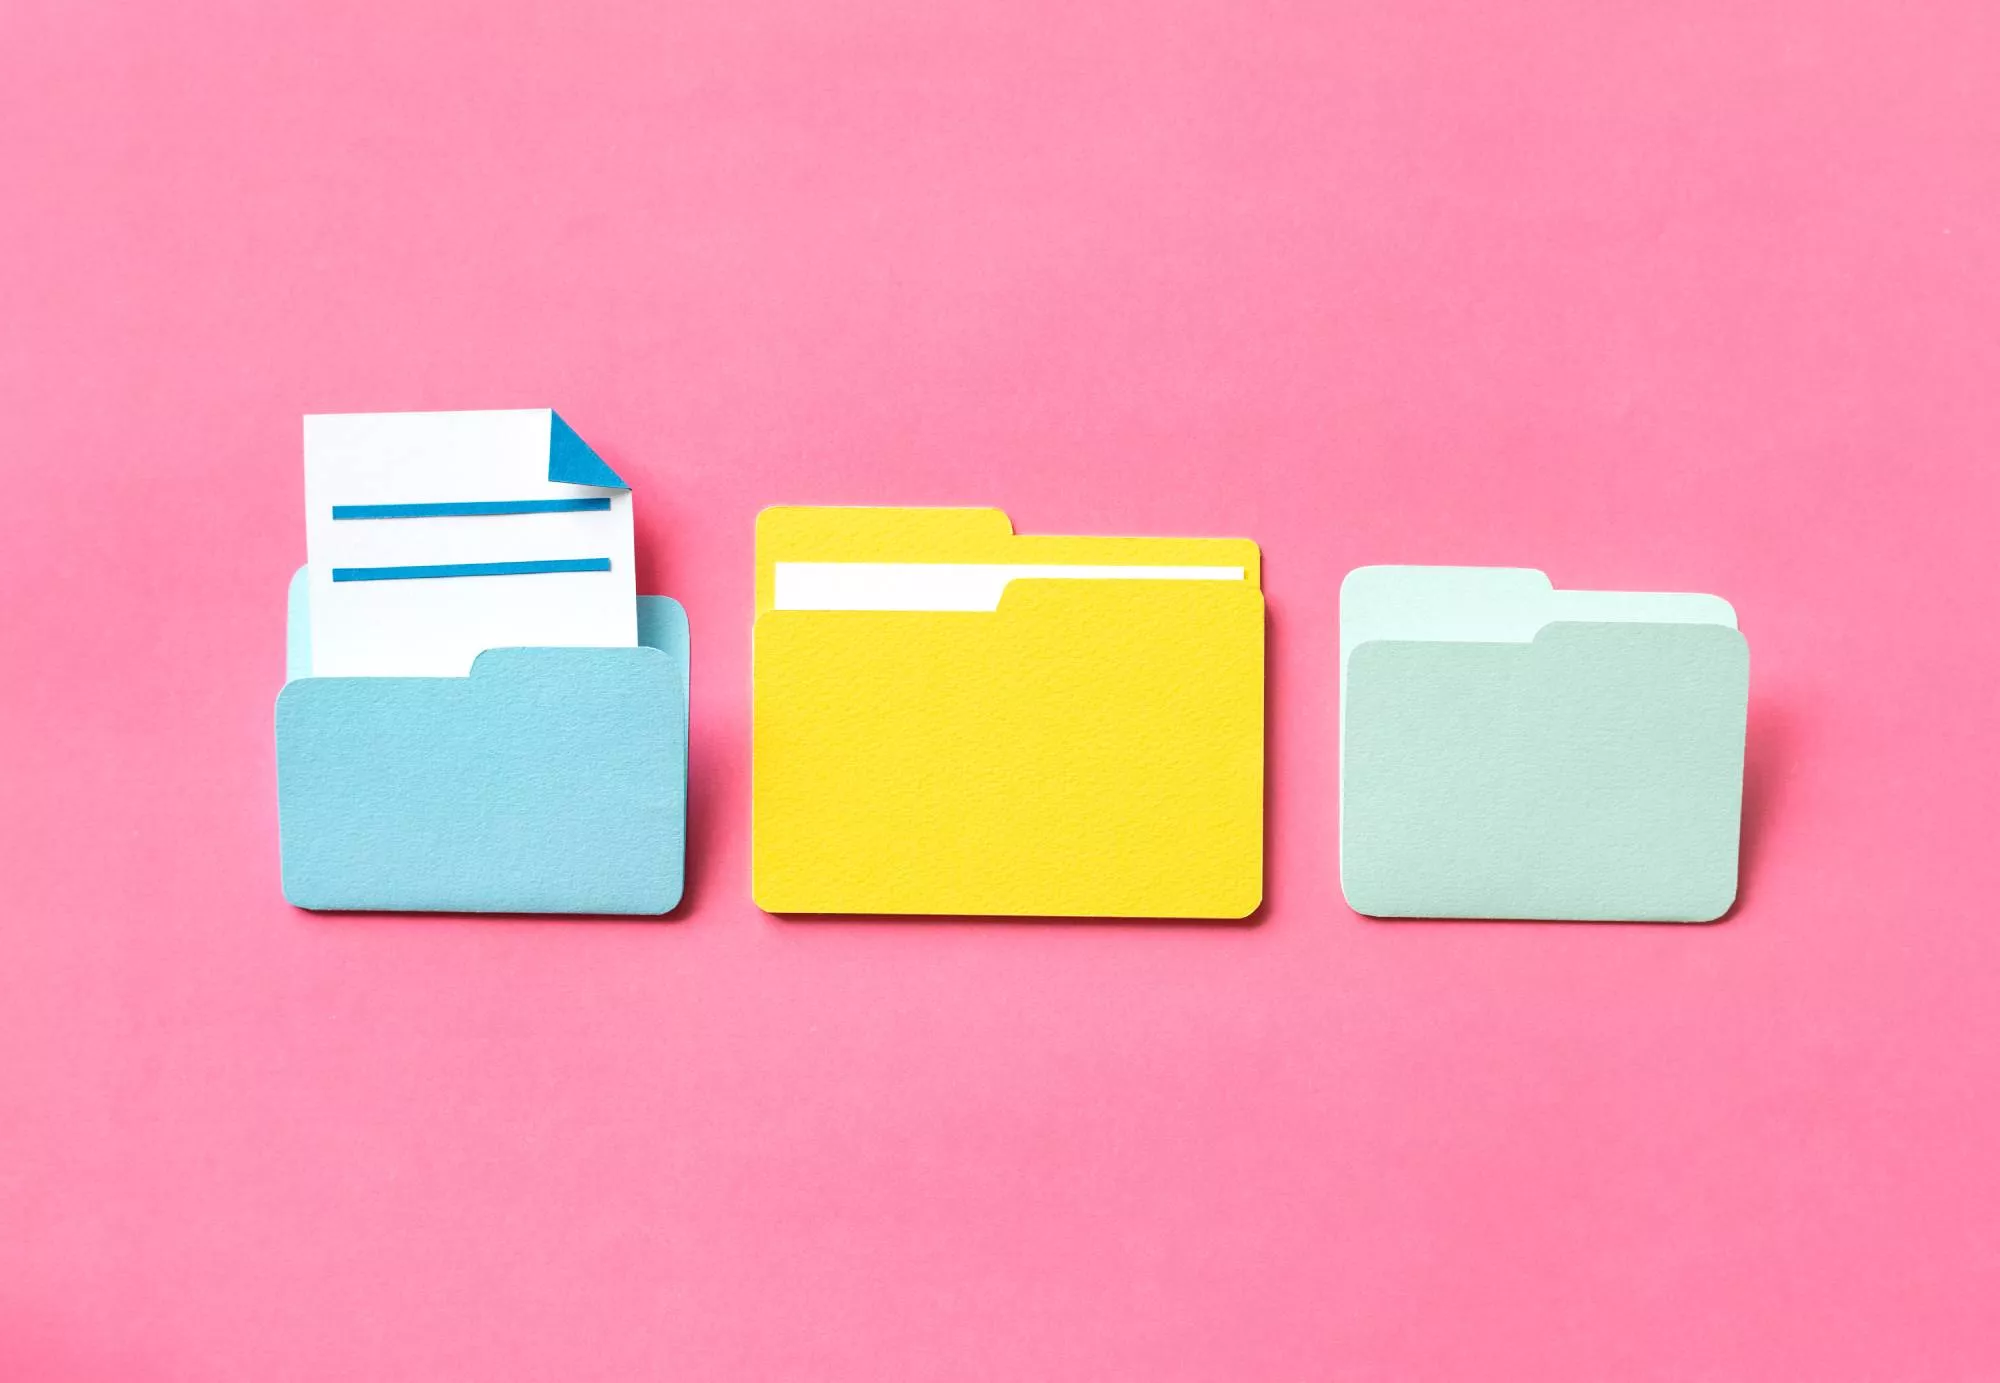 photo of three filing folders on a pink background with a ucc filing document sticking out